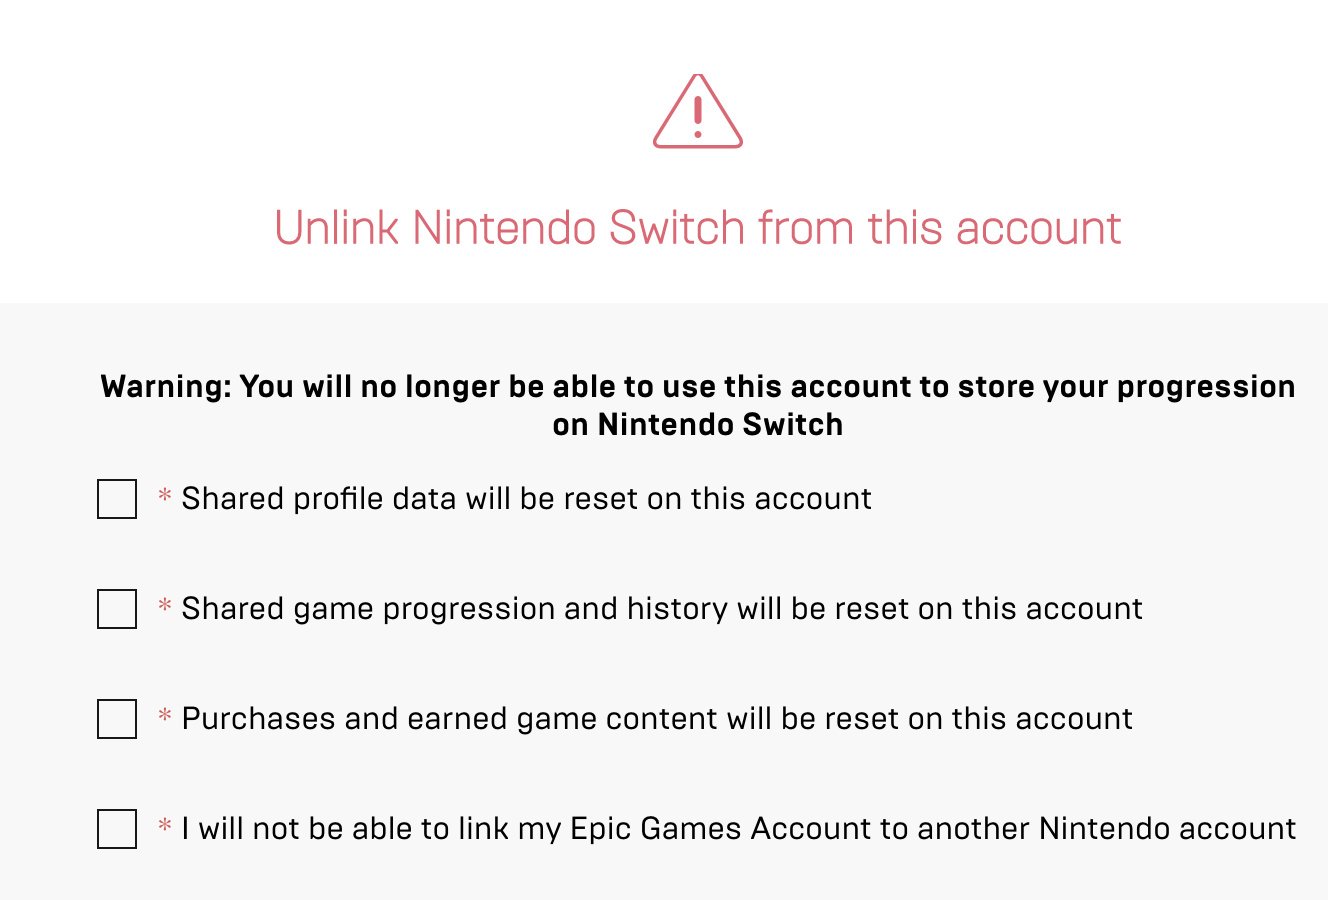 How To Transfer Your Fortnite Account Between Nintendo Accounts - Guide